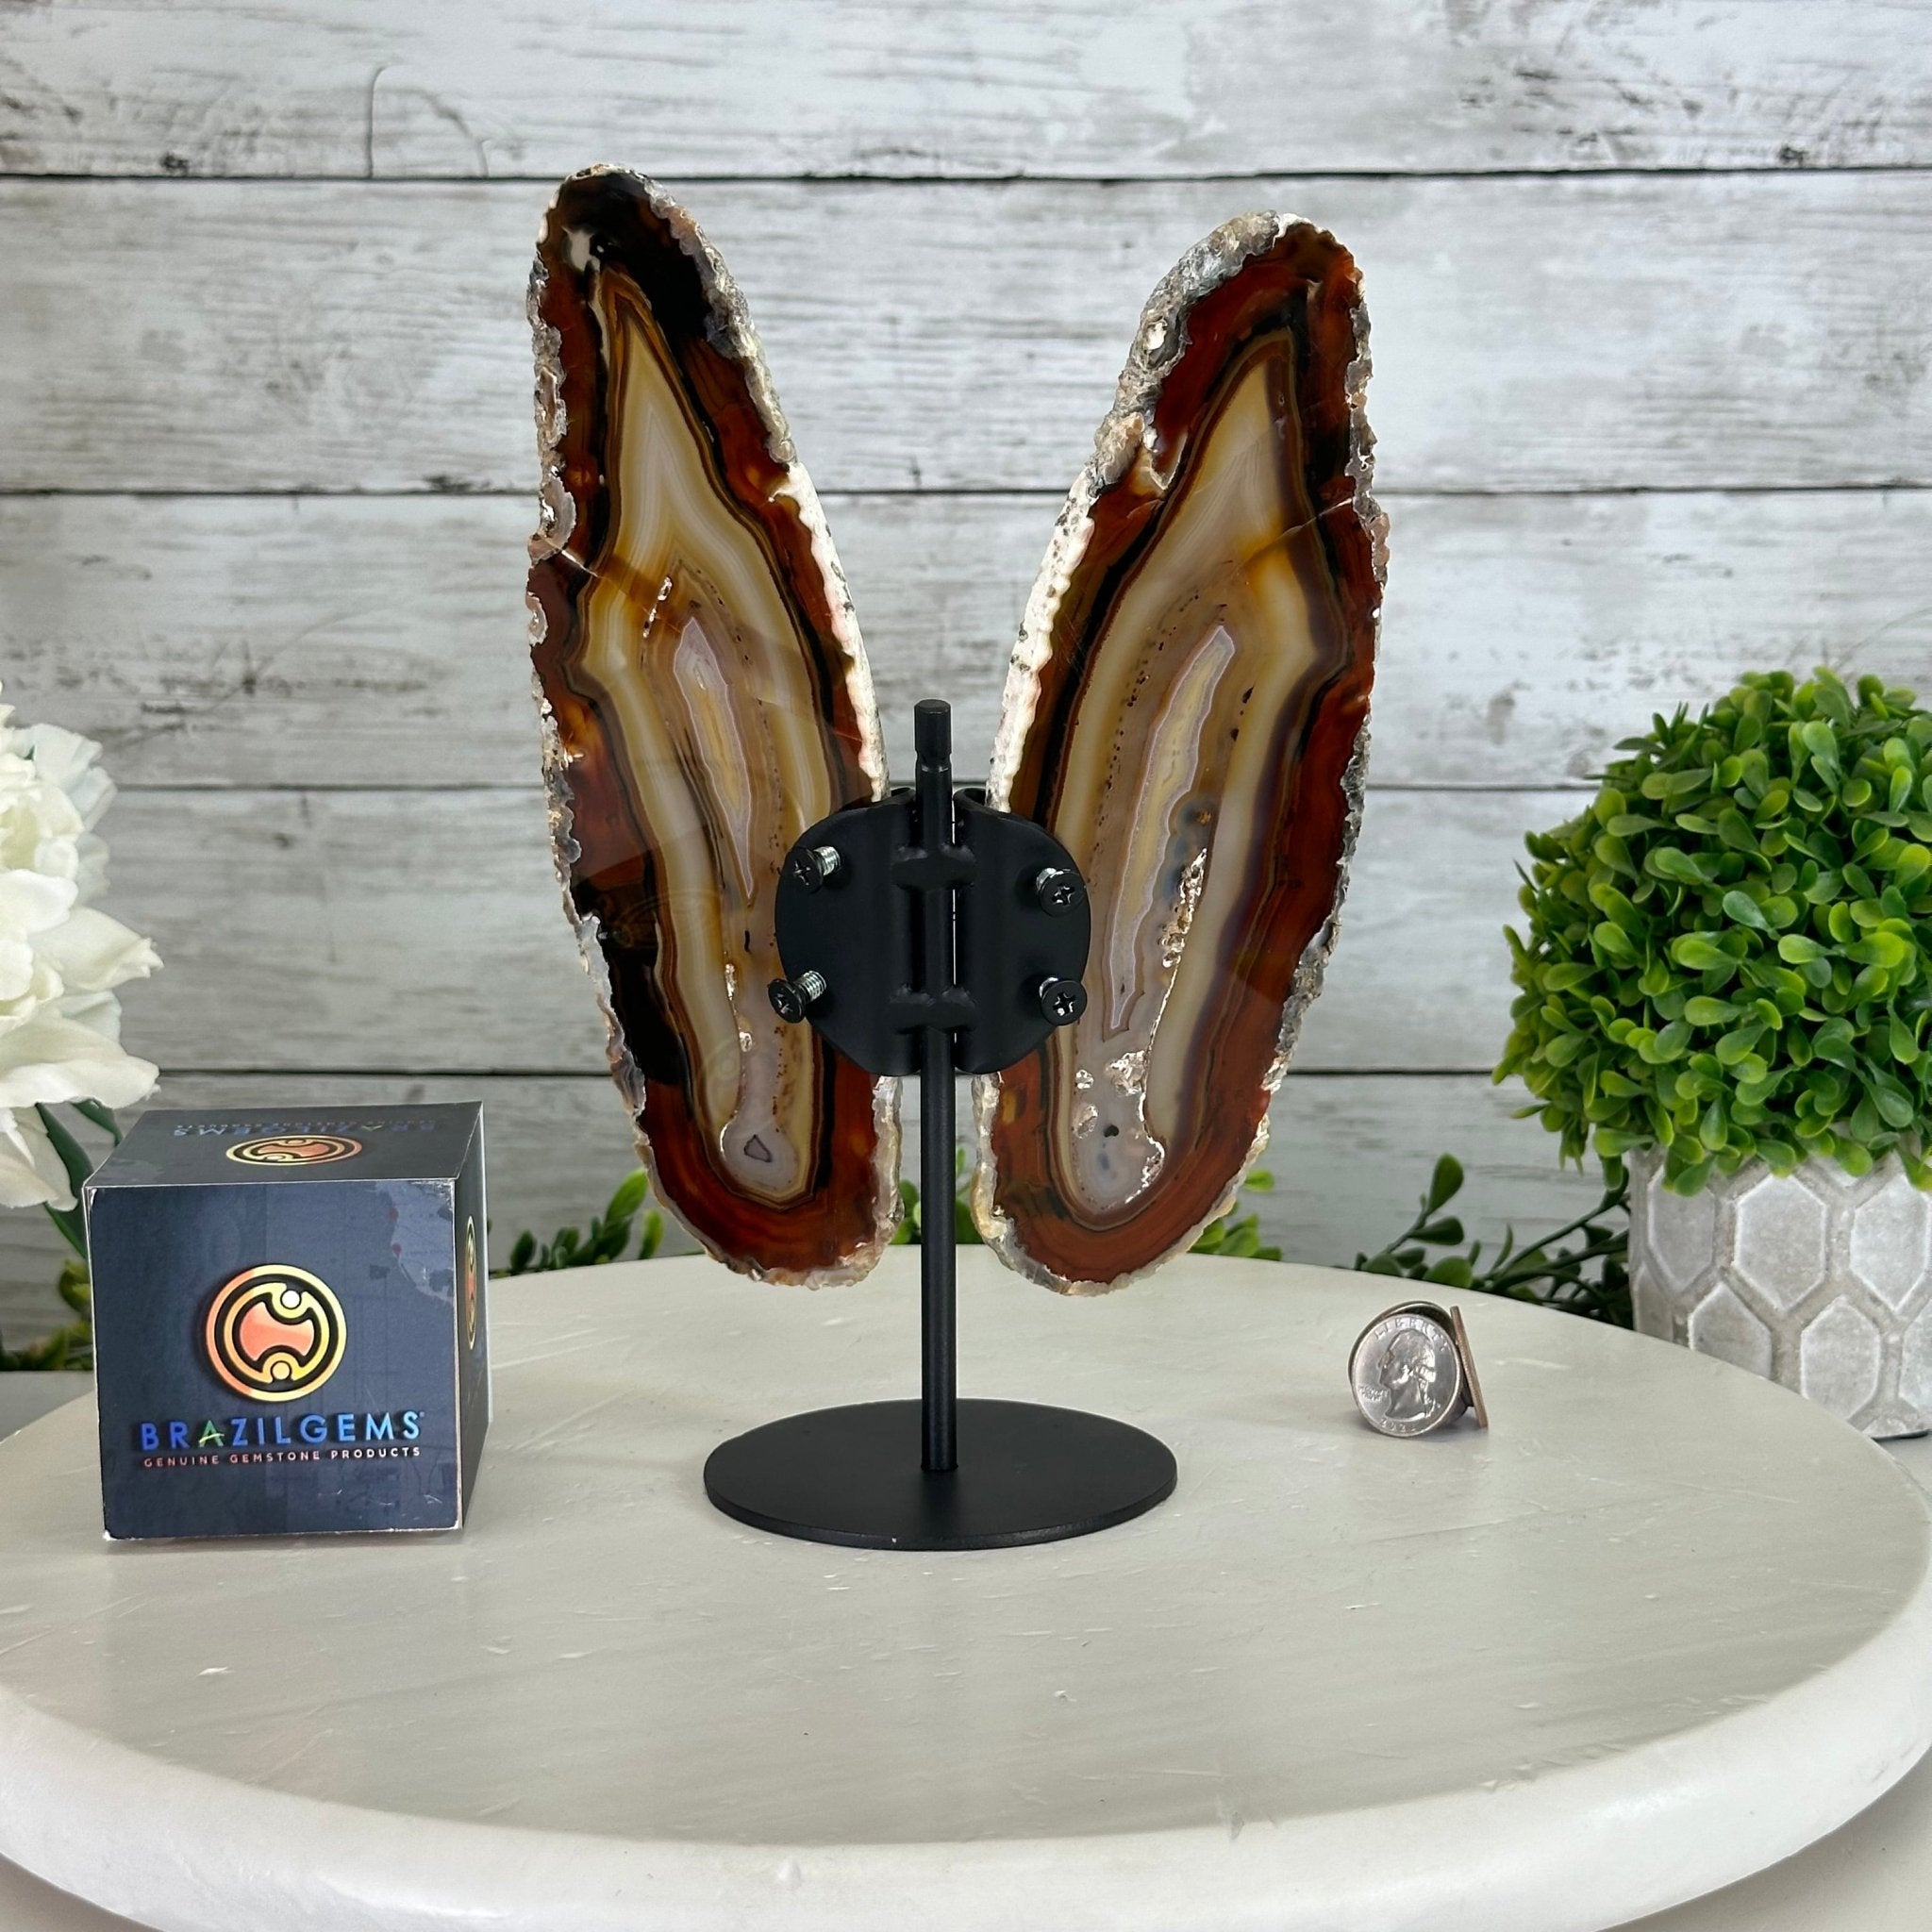 Natural Brazilian Agate "Butterfly Wings", 9.5" Tall #5050NA-148 - Brazil GemsBrazil GemsNatural Brazilian Agate "Butterfly Wings", 9.5" Tall #5050NA-148Agate Butterfly Wings5050NA-148